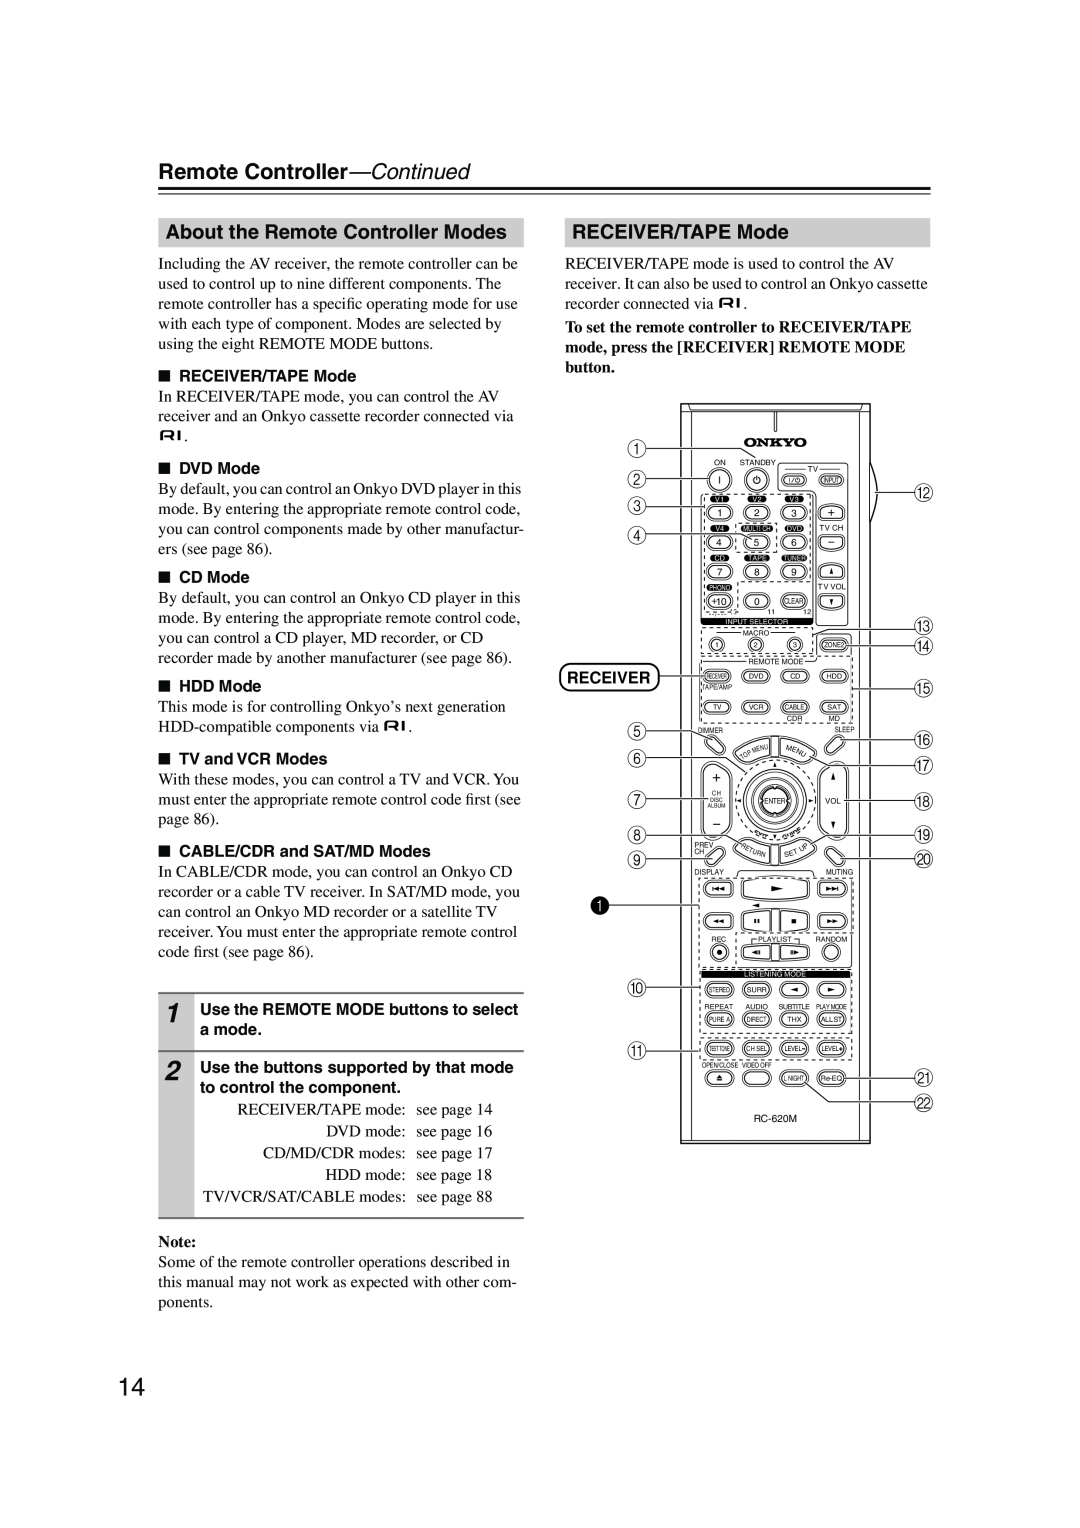 Onkyo SR804 instruction manual Remote Controller—Continued, About the Remote Controller Modes, RECEIVER/TAPE Mode 